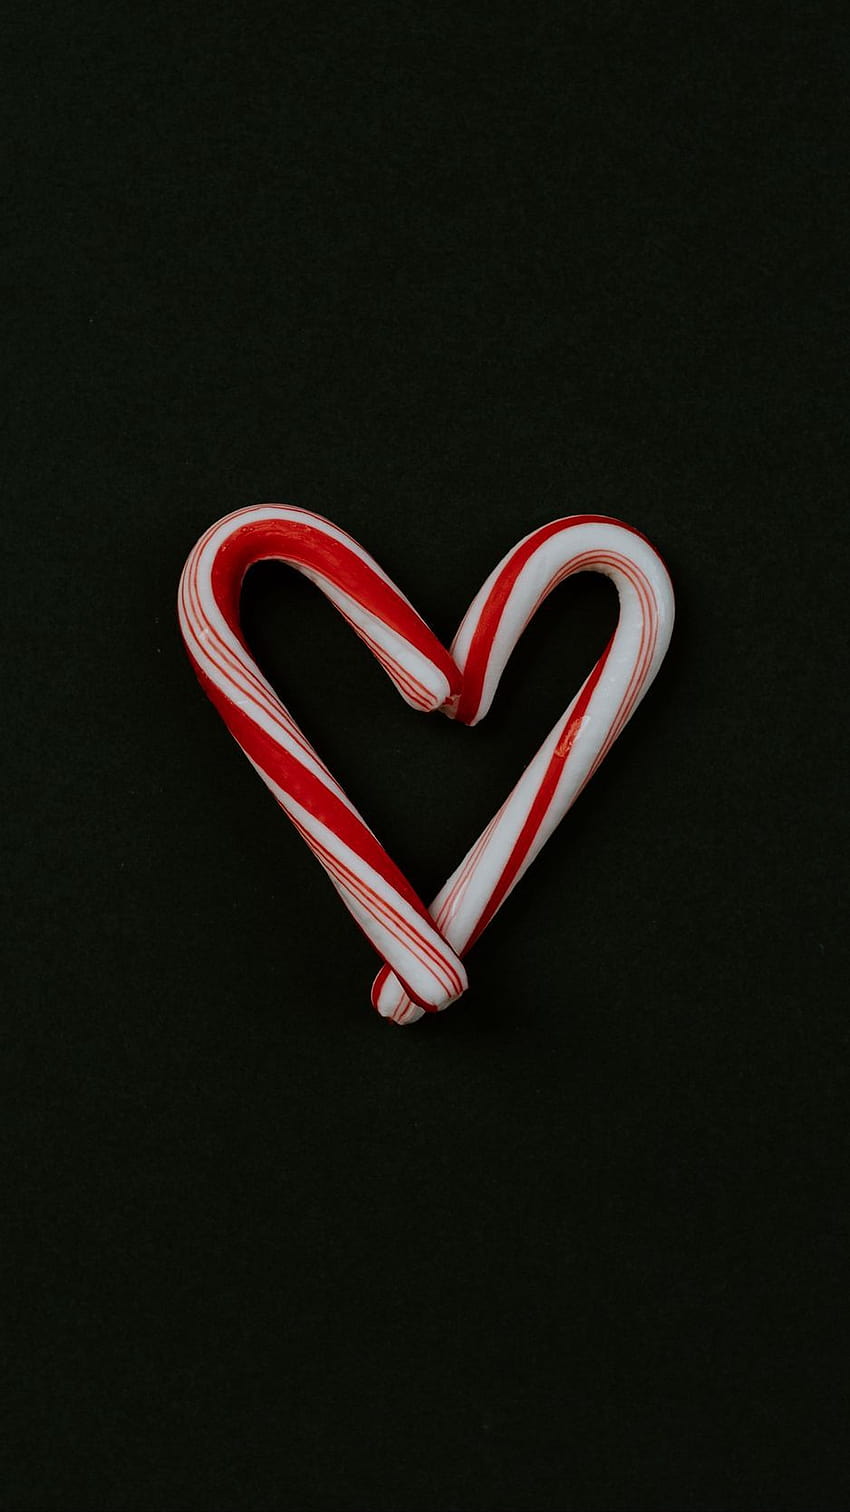 A heart shaped candy cane on black background - Candy cane